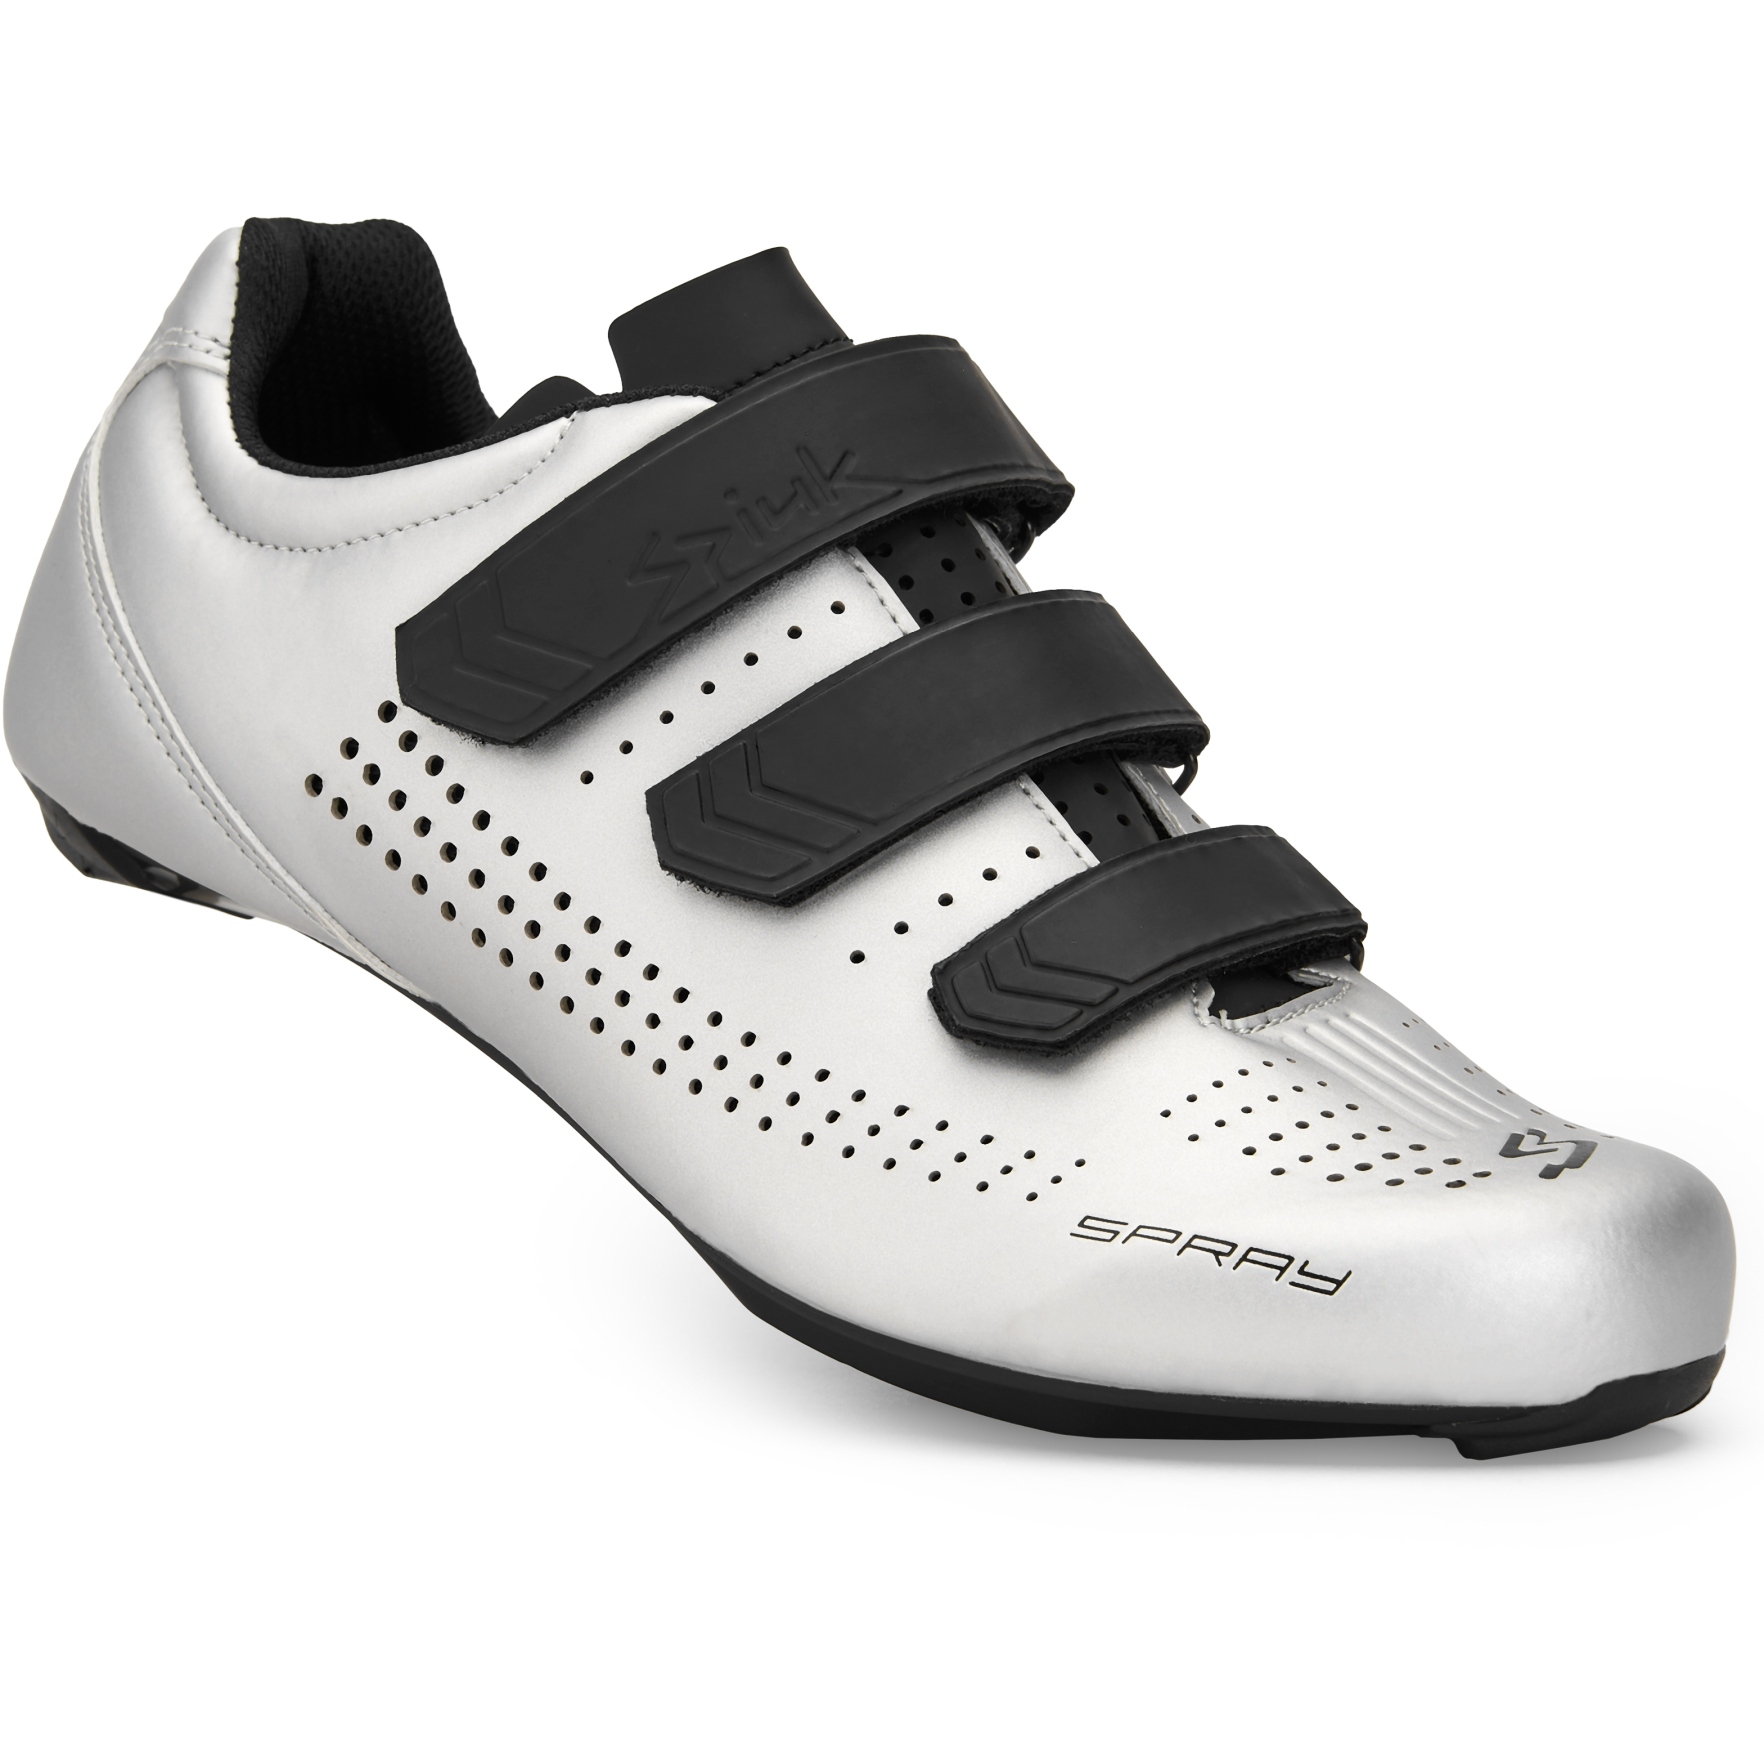 Picture of Spiuk Spray Road Shoe - silver